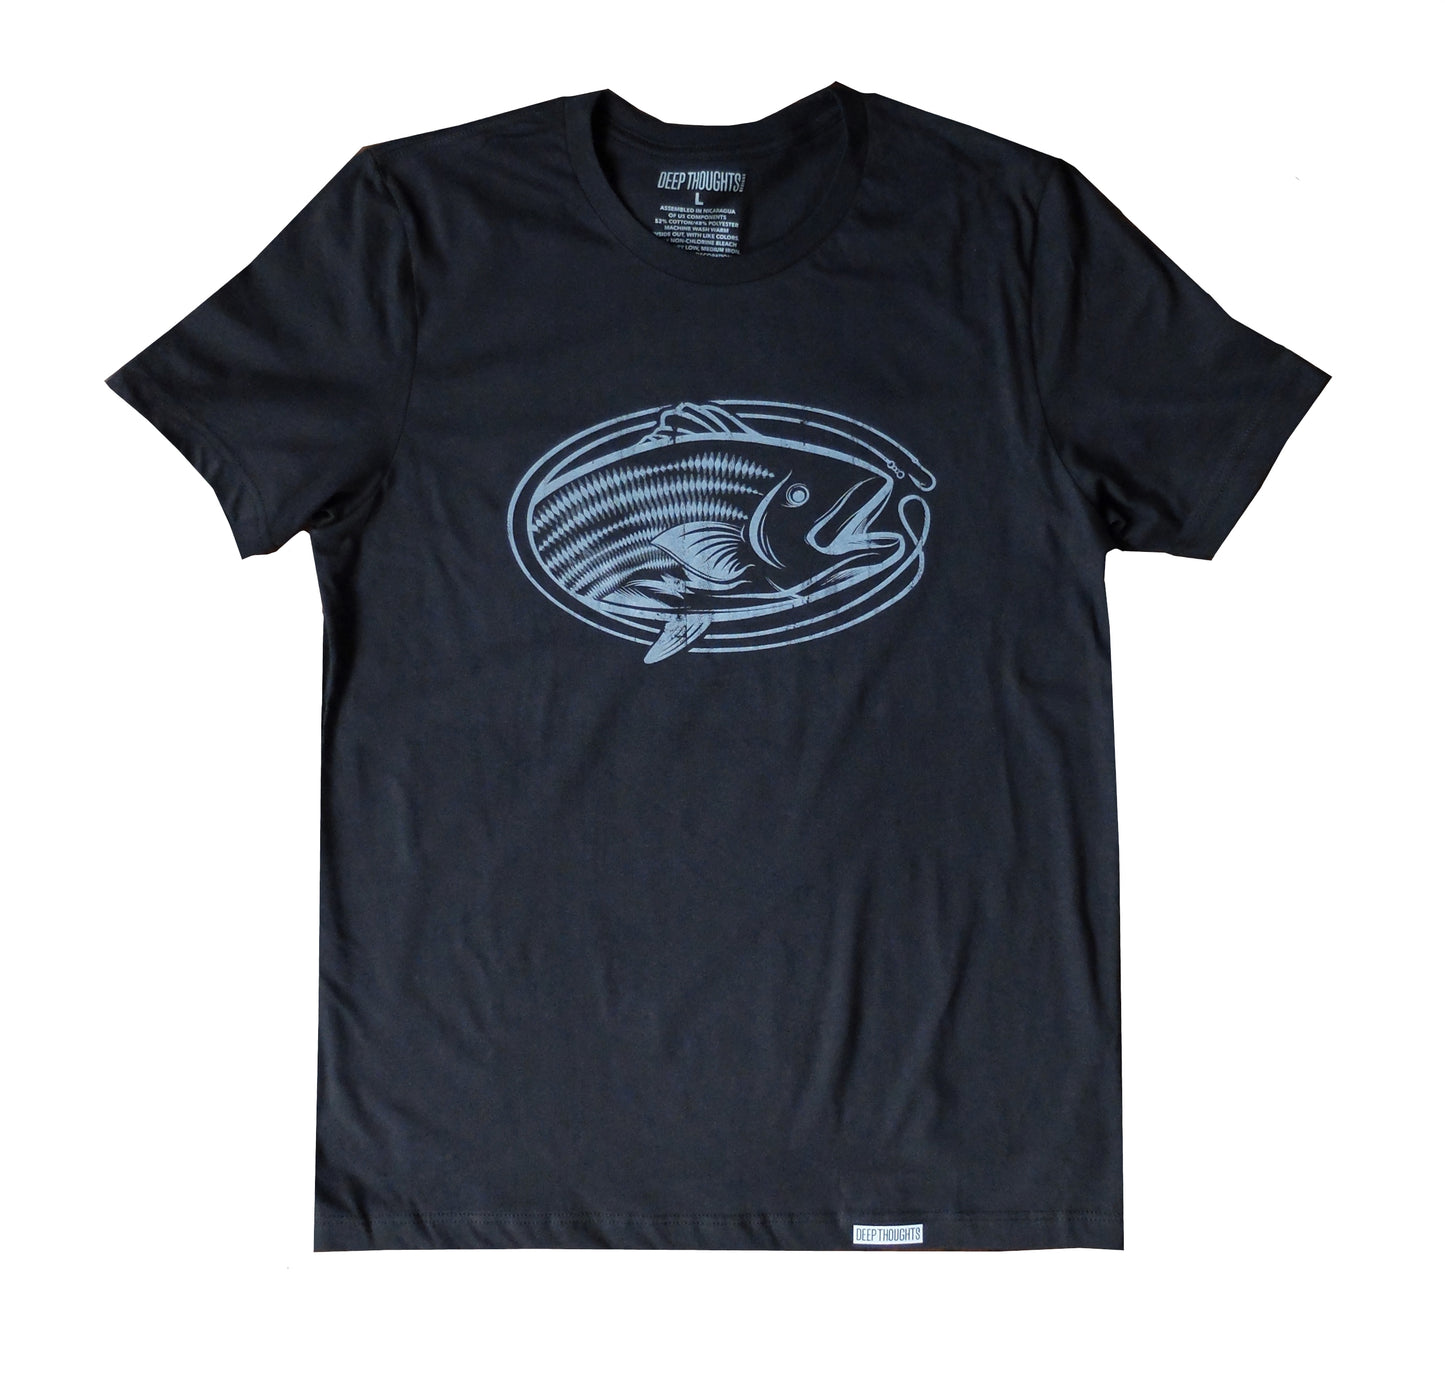 vintage black cotton t-shirt with white oval-shaped striped bass graphic